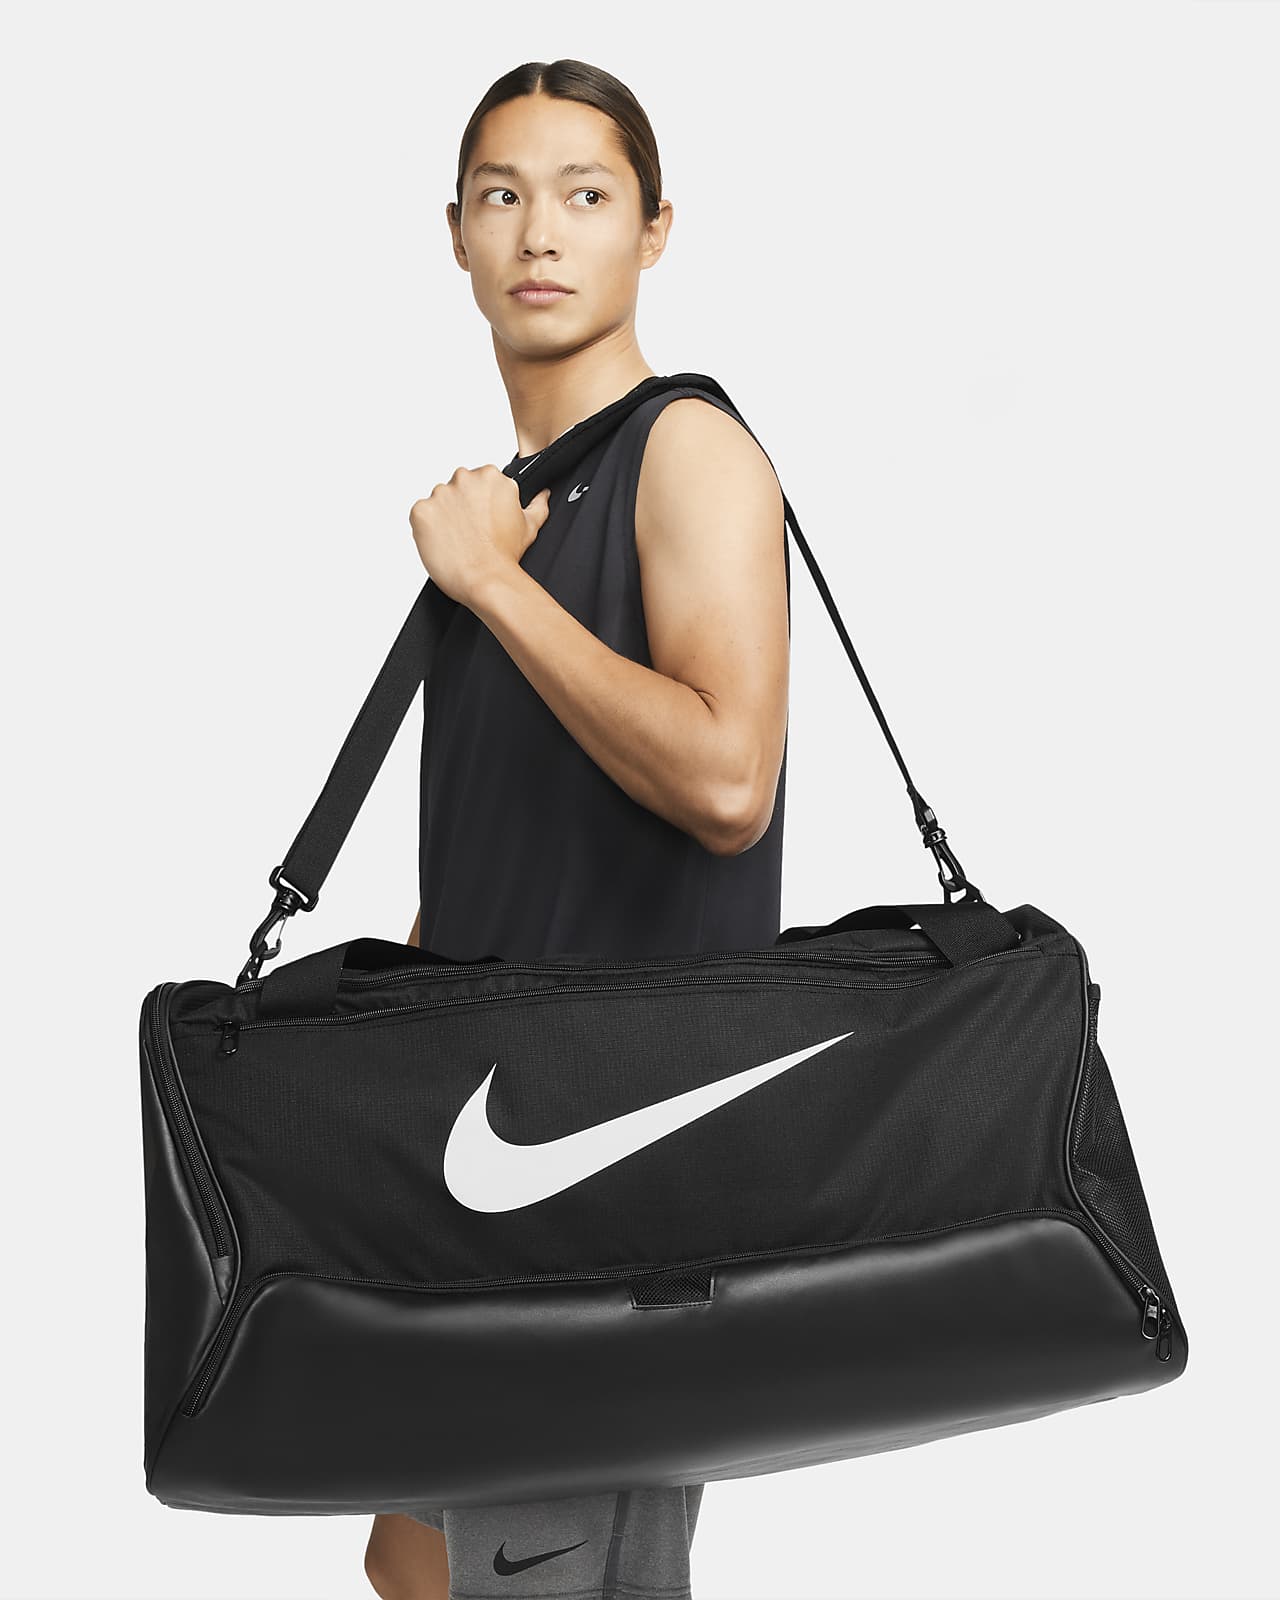 SASOM | bags Nike Faux Fur Tote Bag Black Check the latest price now!-cokhiquangminh.vn